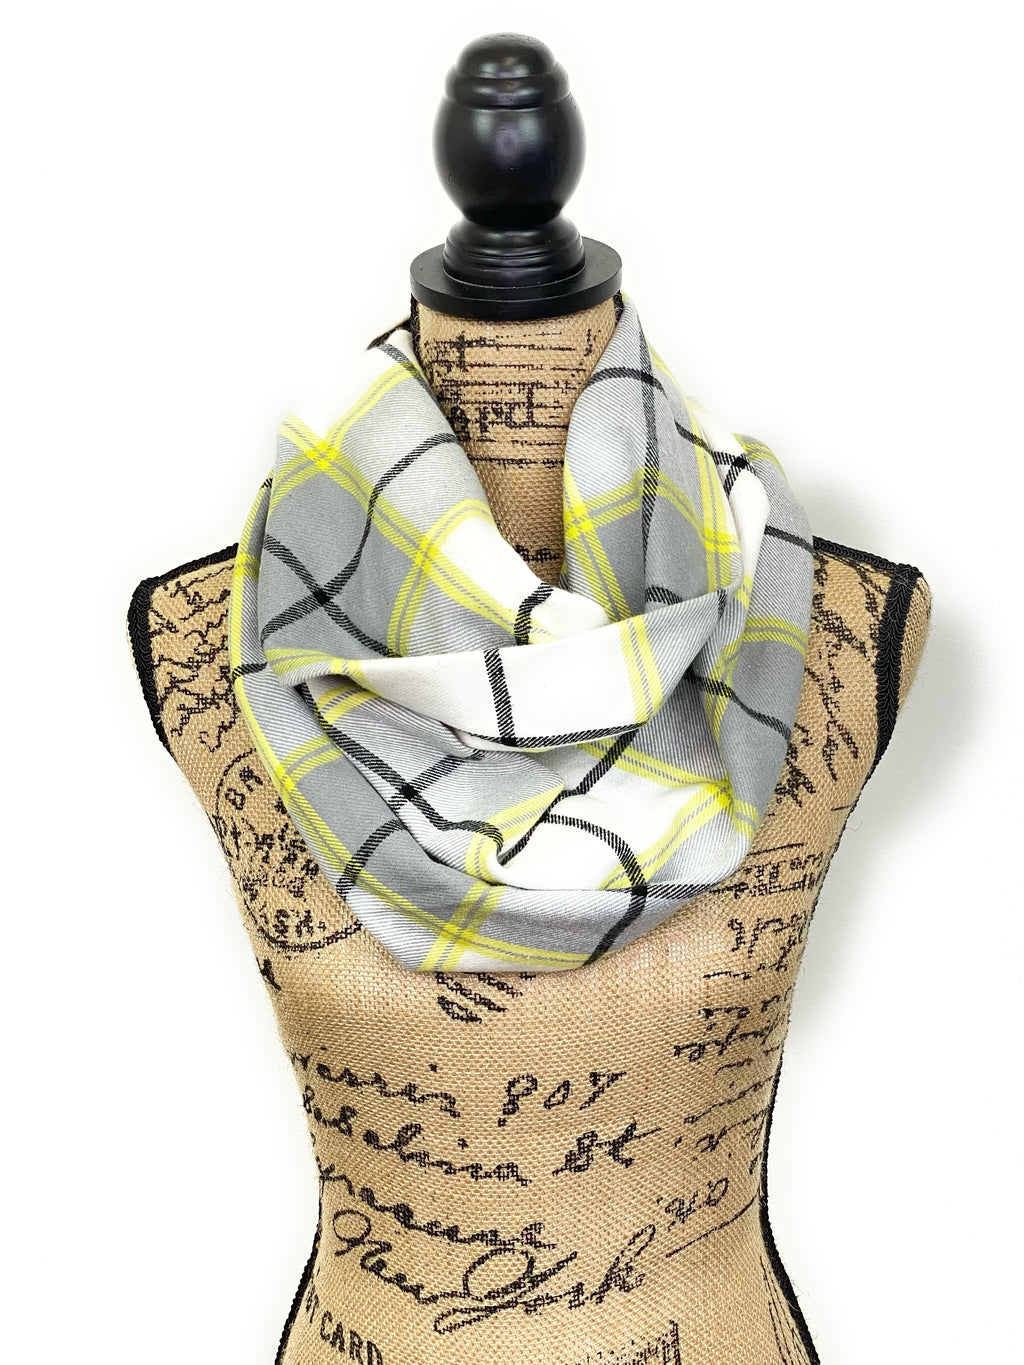 White, Gray, Black, and Yellow Plaid Flannel Infinity or Blanket Scarf